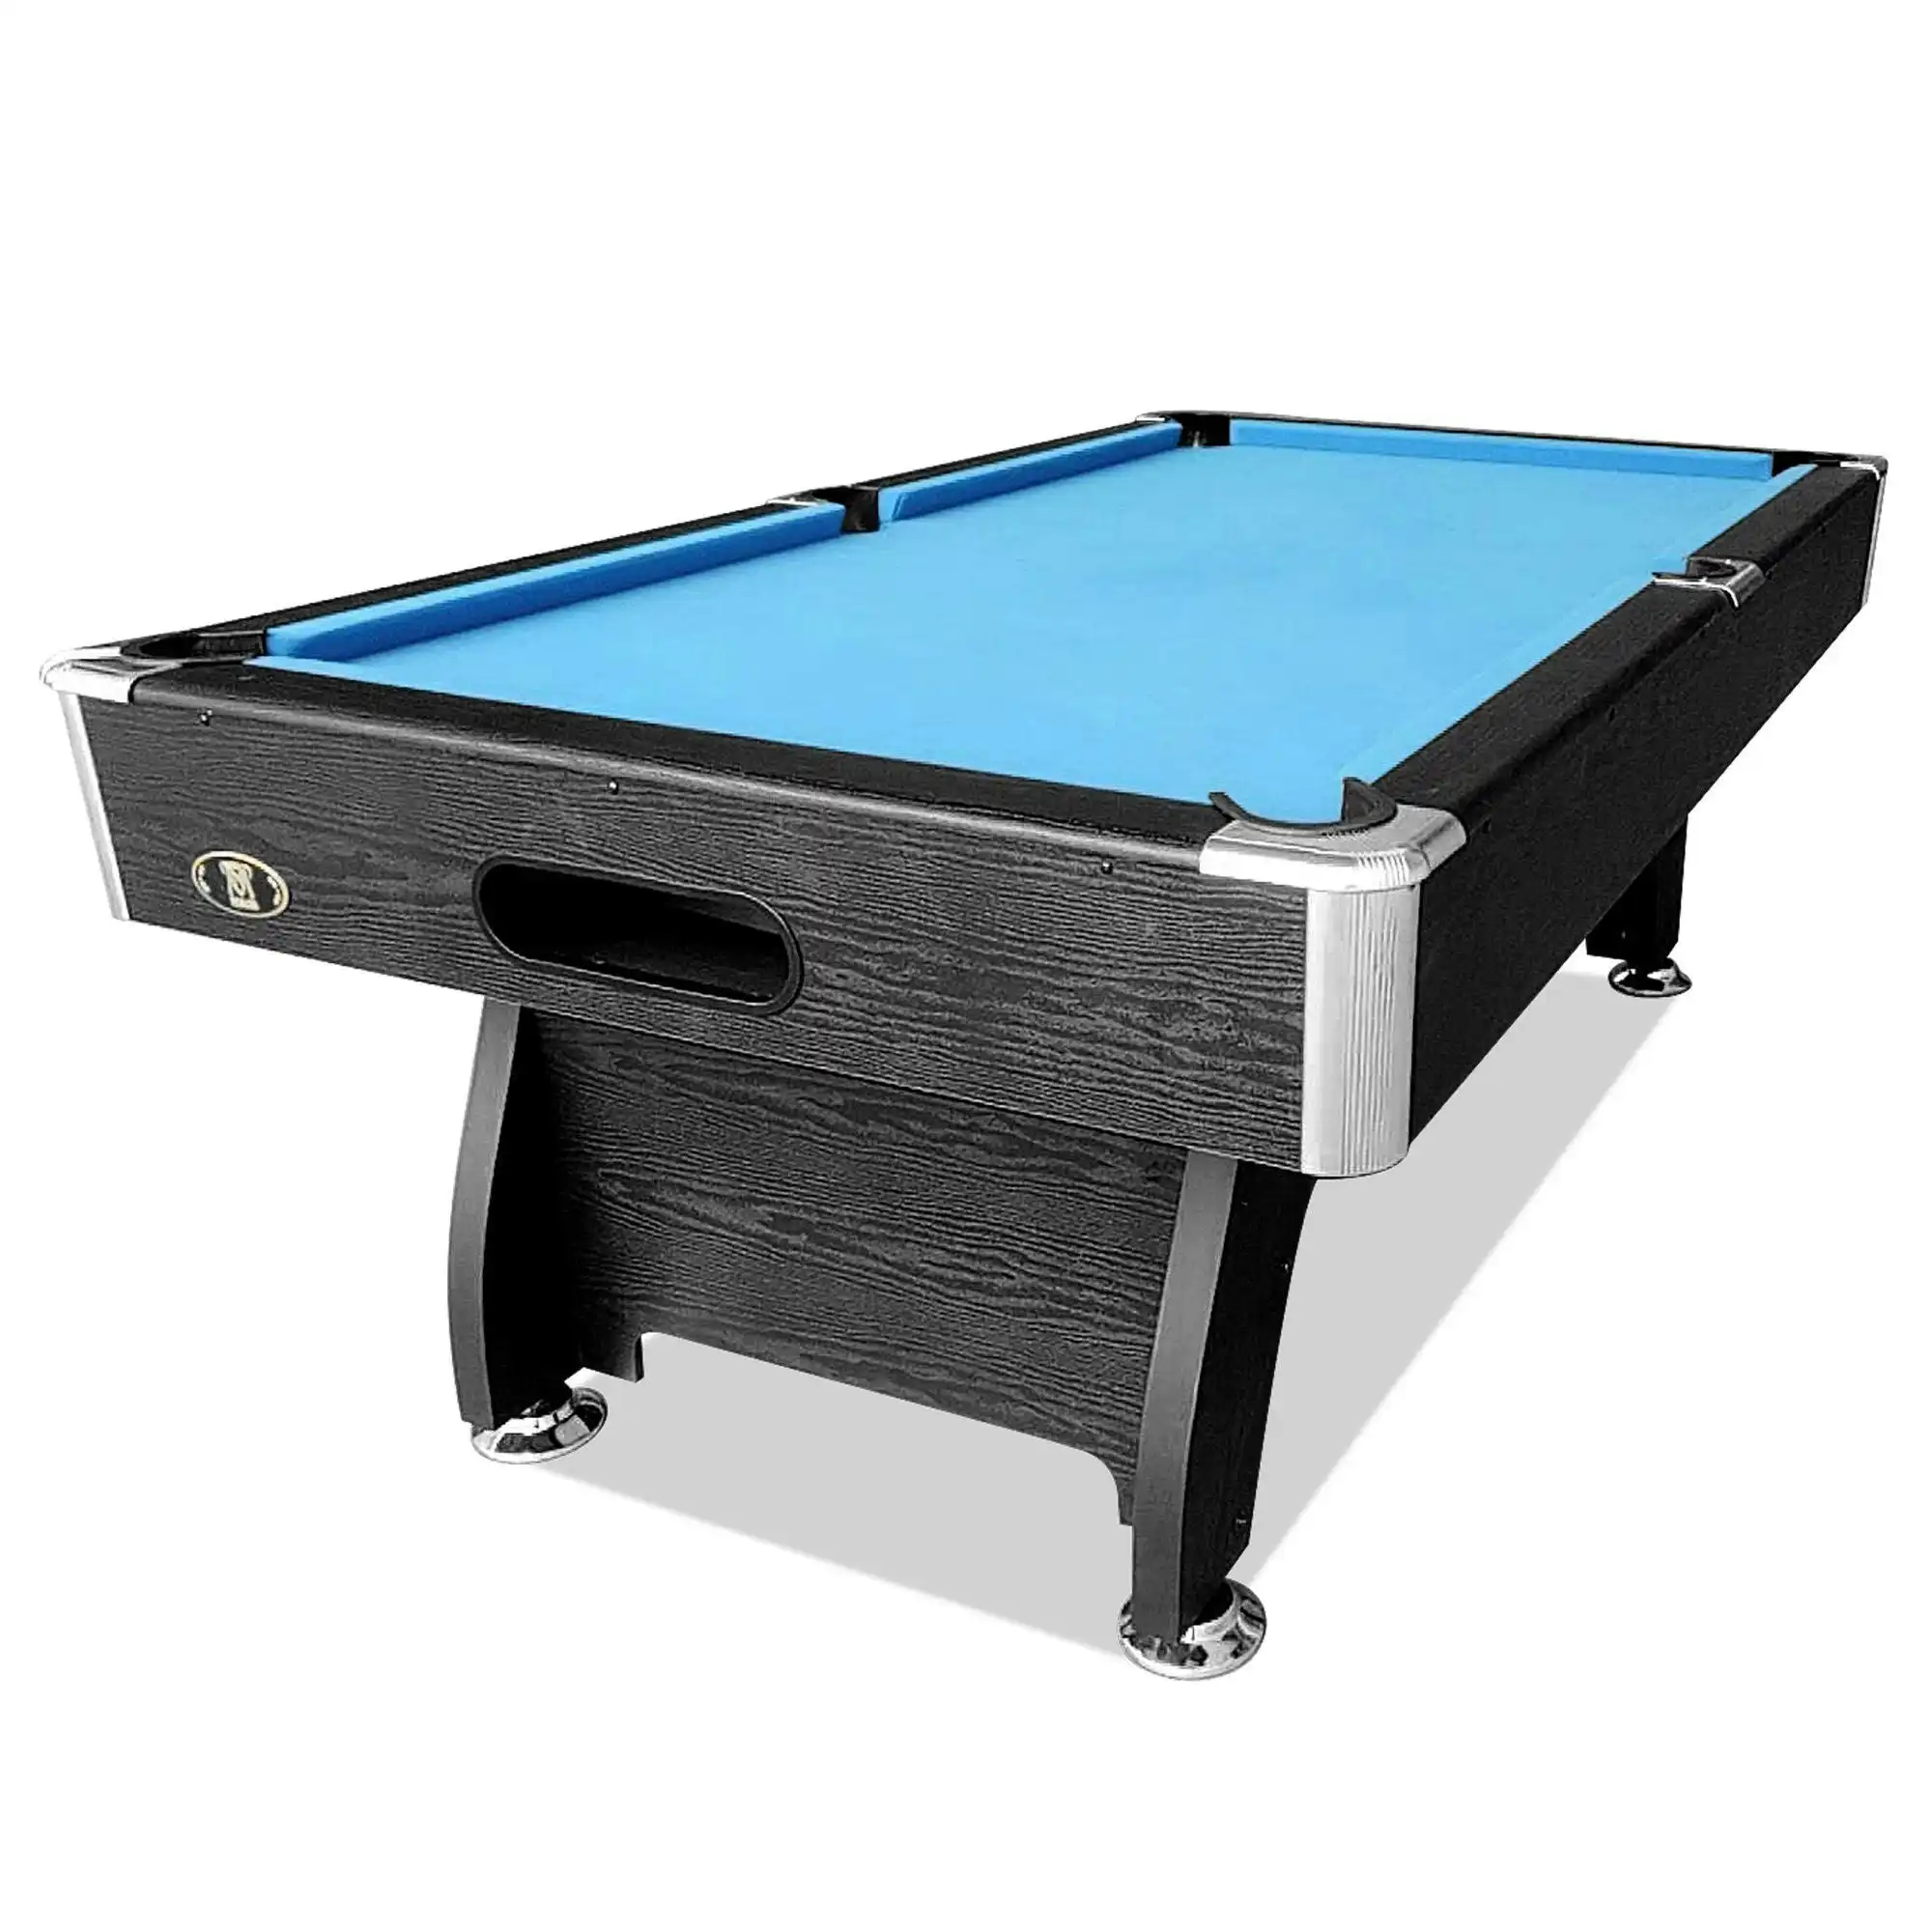 MACE 7FT MDF Pool Snooker Billiard Table with Accessories Pack, Black Frame